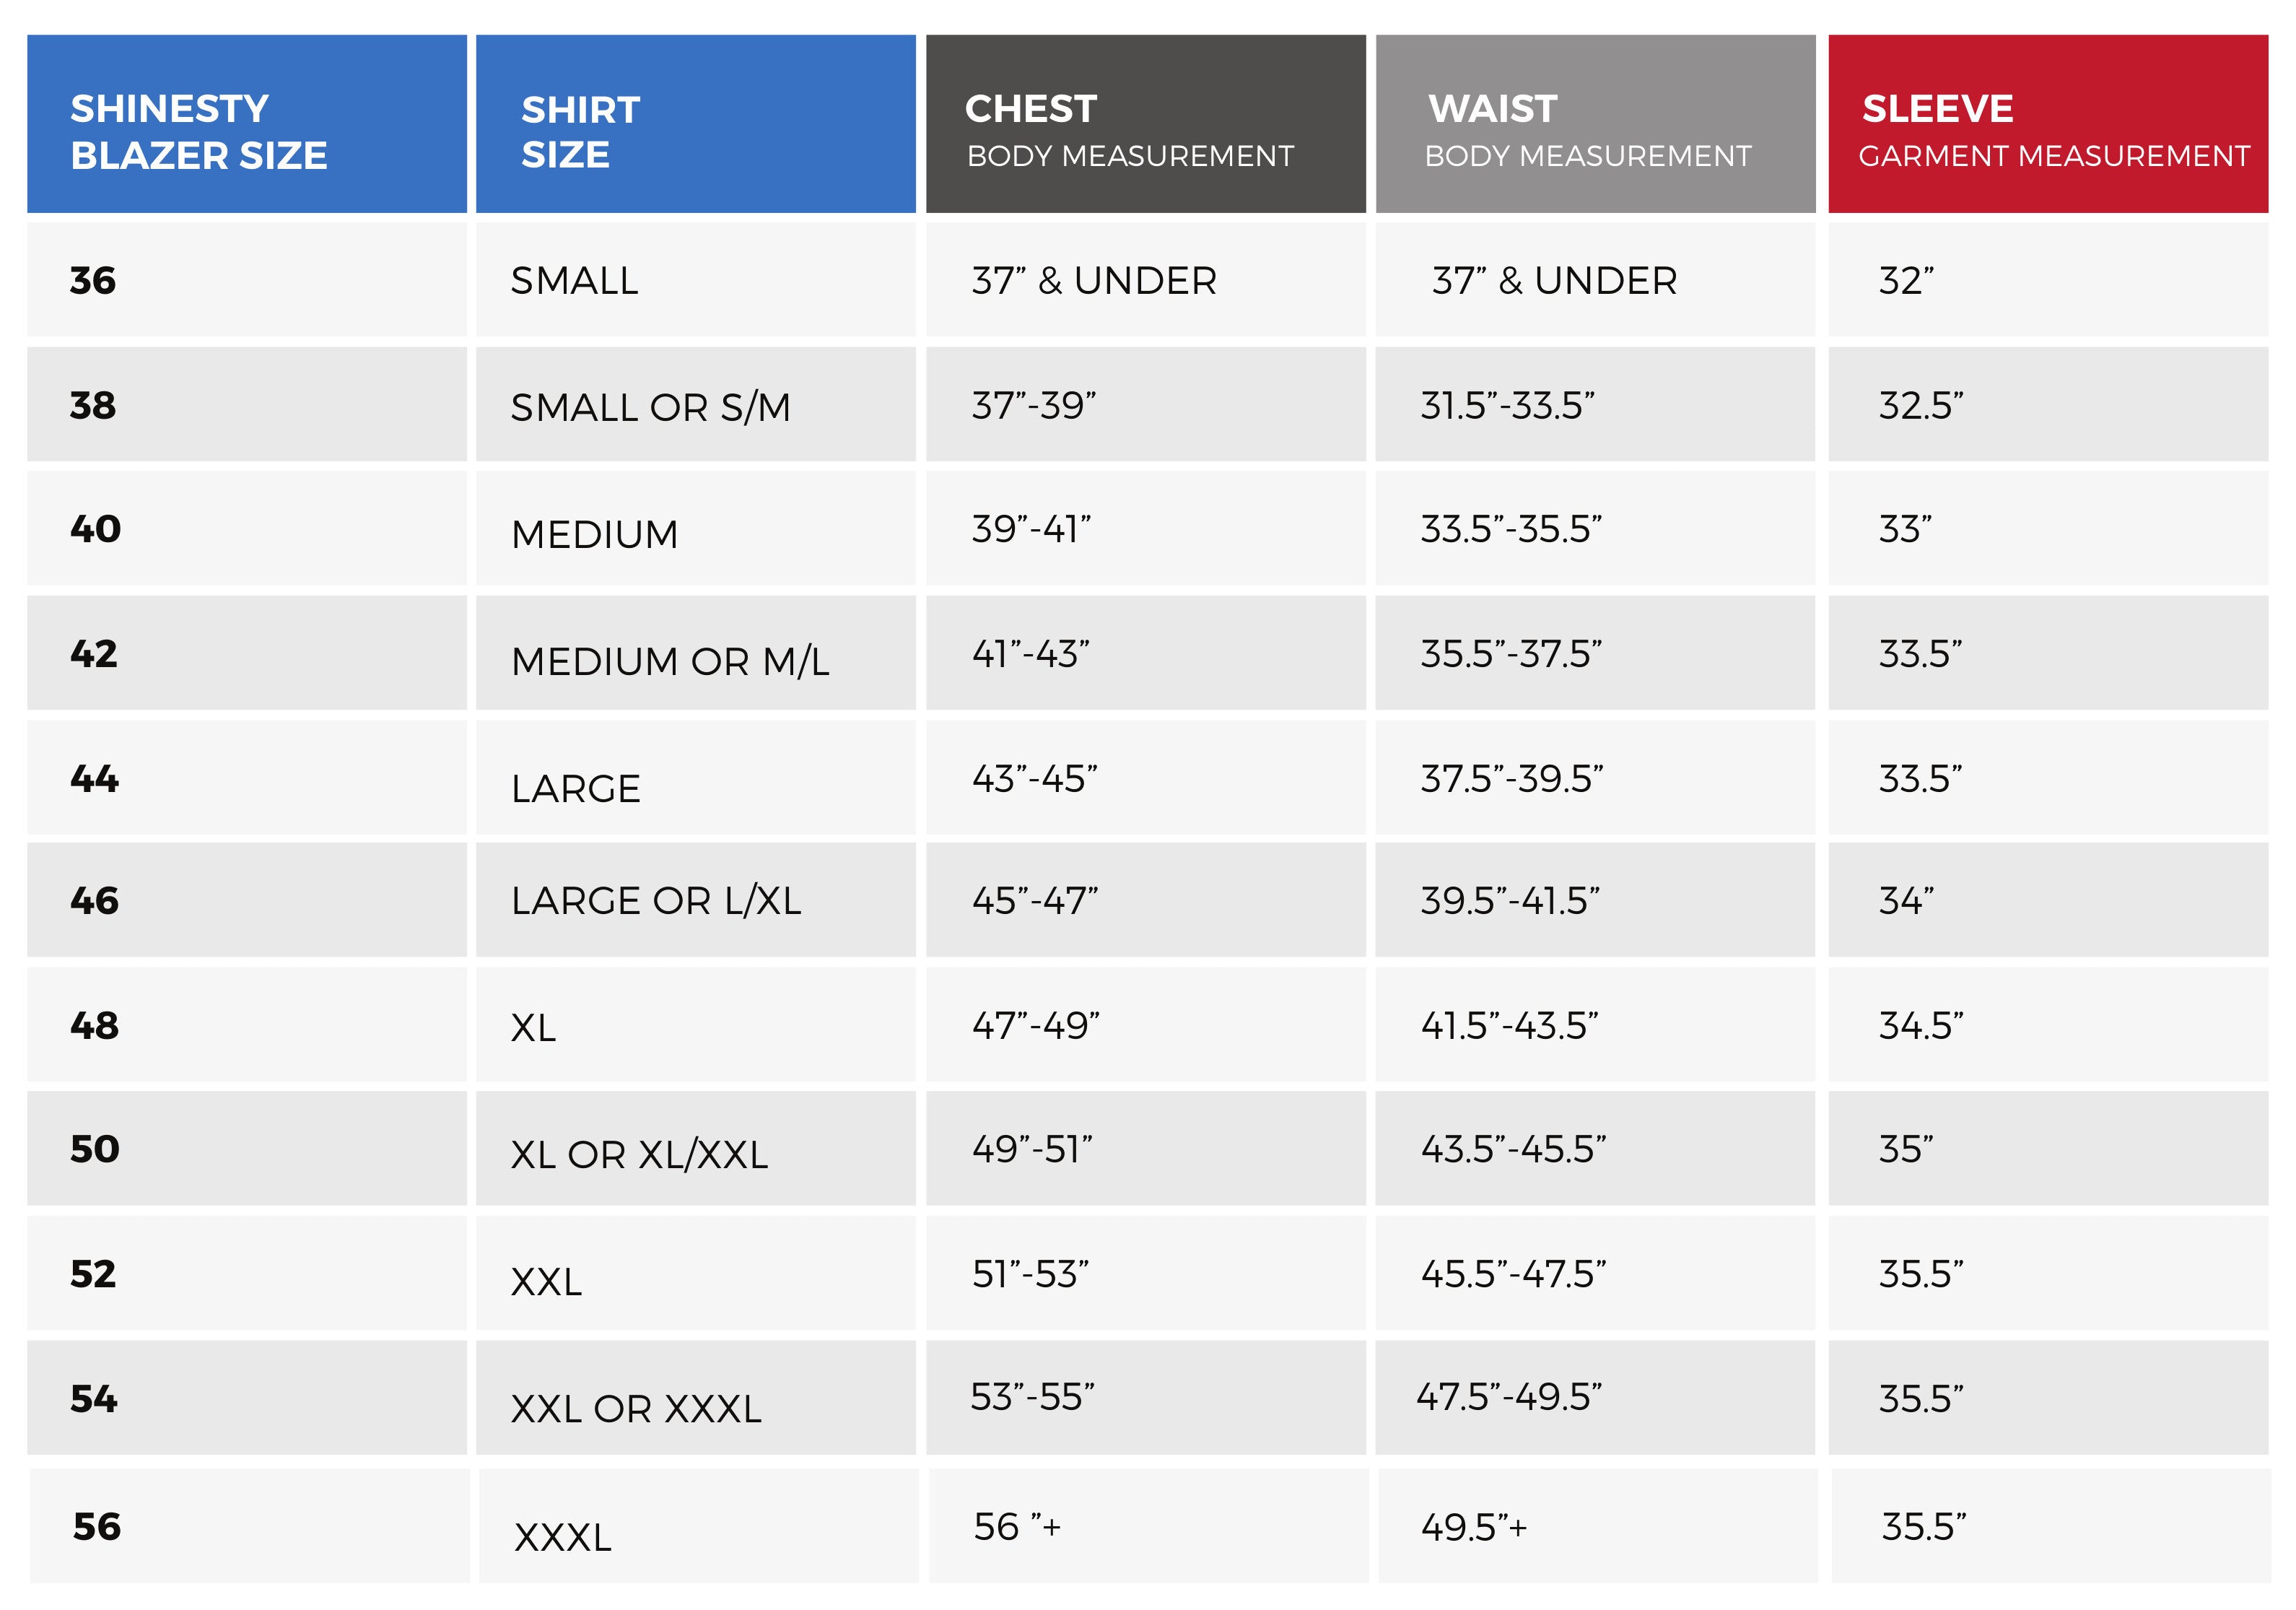 Mens Suit Size Chart Conversions - Conversion Chart and Table Online